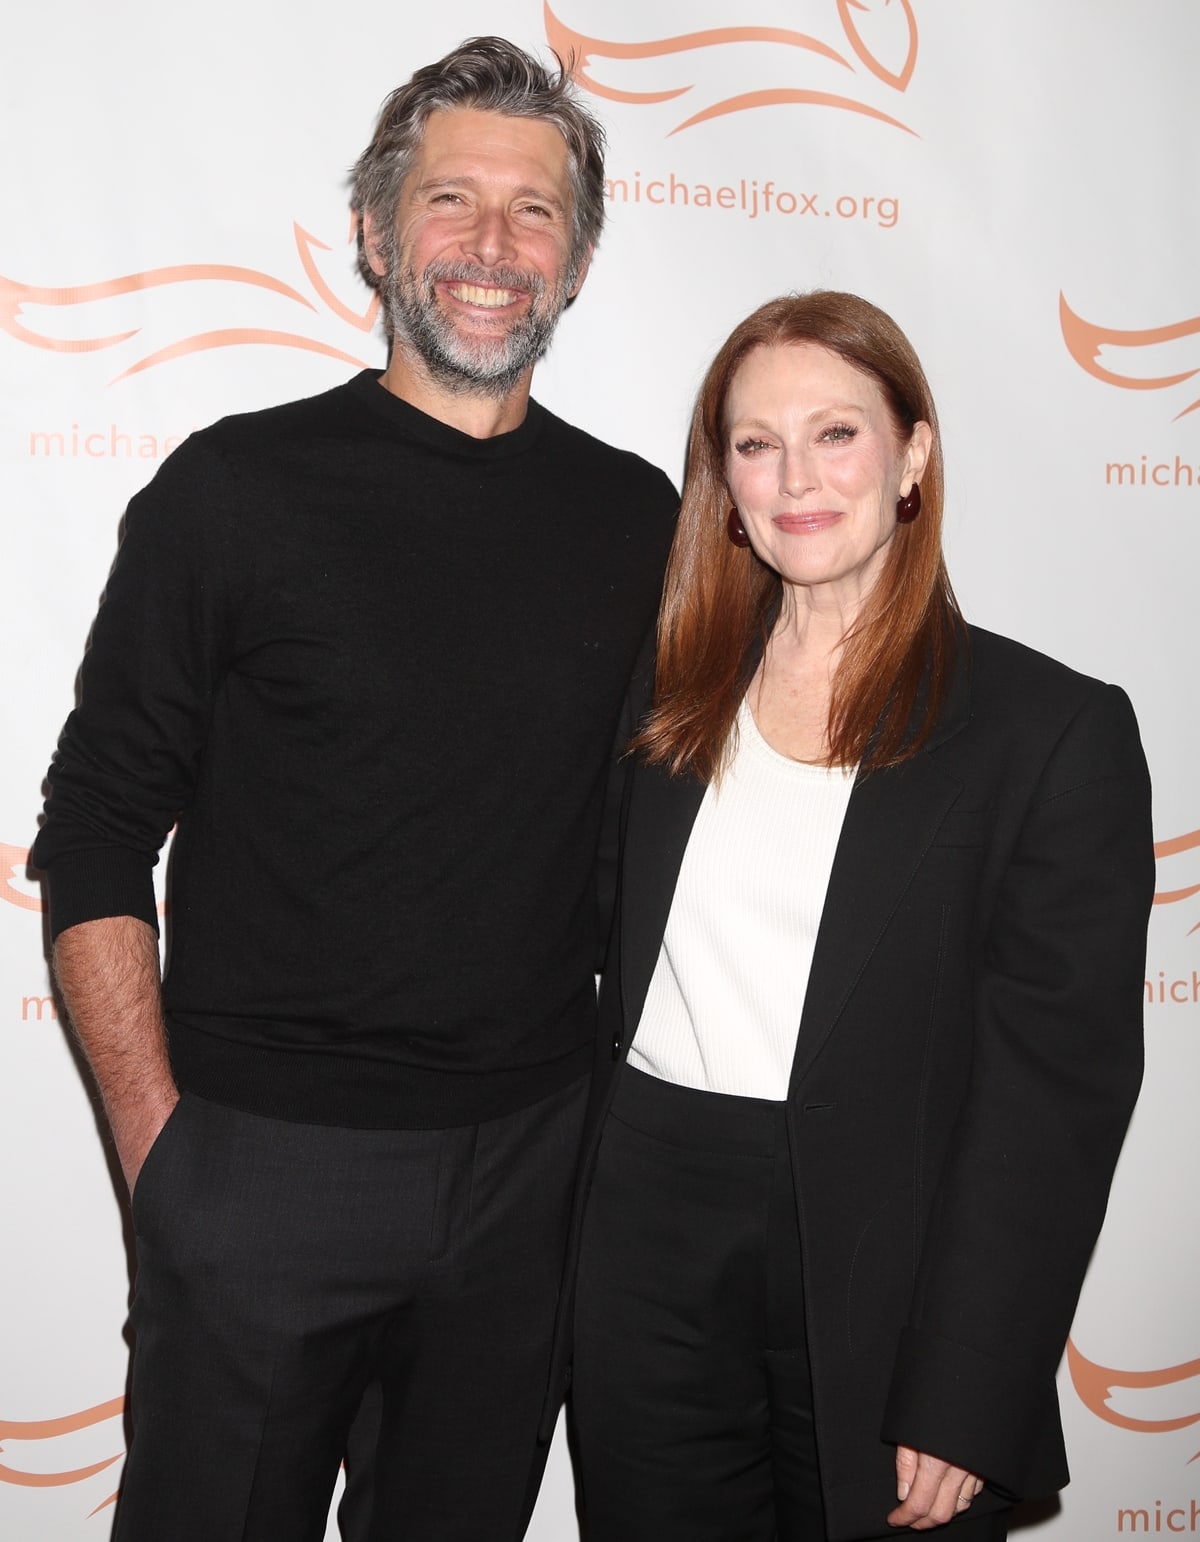 Julianne Moore, who is 5 feet 3 and a half inches tall (161.3 cm), appears notably shorter when compared to her husband, Bart Freundlich, whose height is 6 feet 2 and three-quarters inches (1.90 m), highlighting a significant height difference between the couple